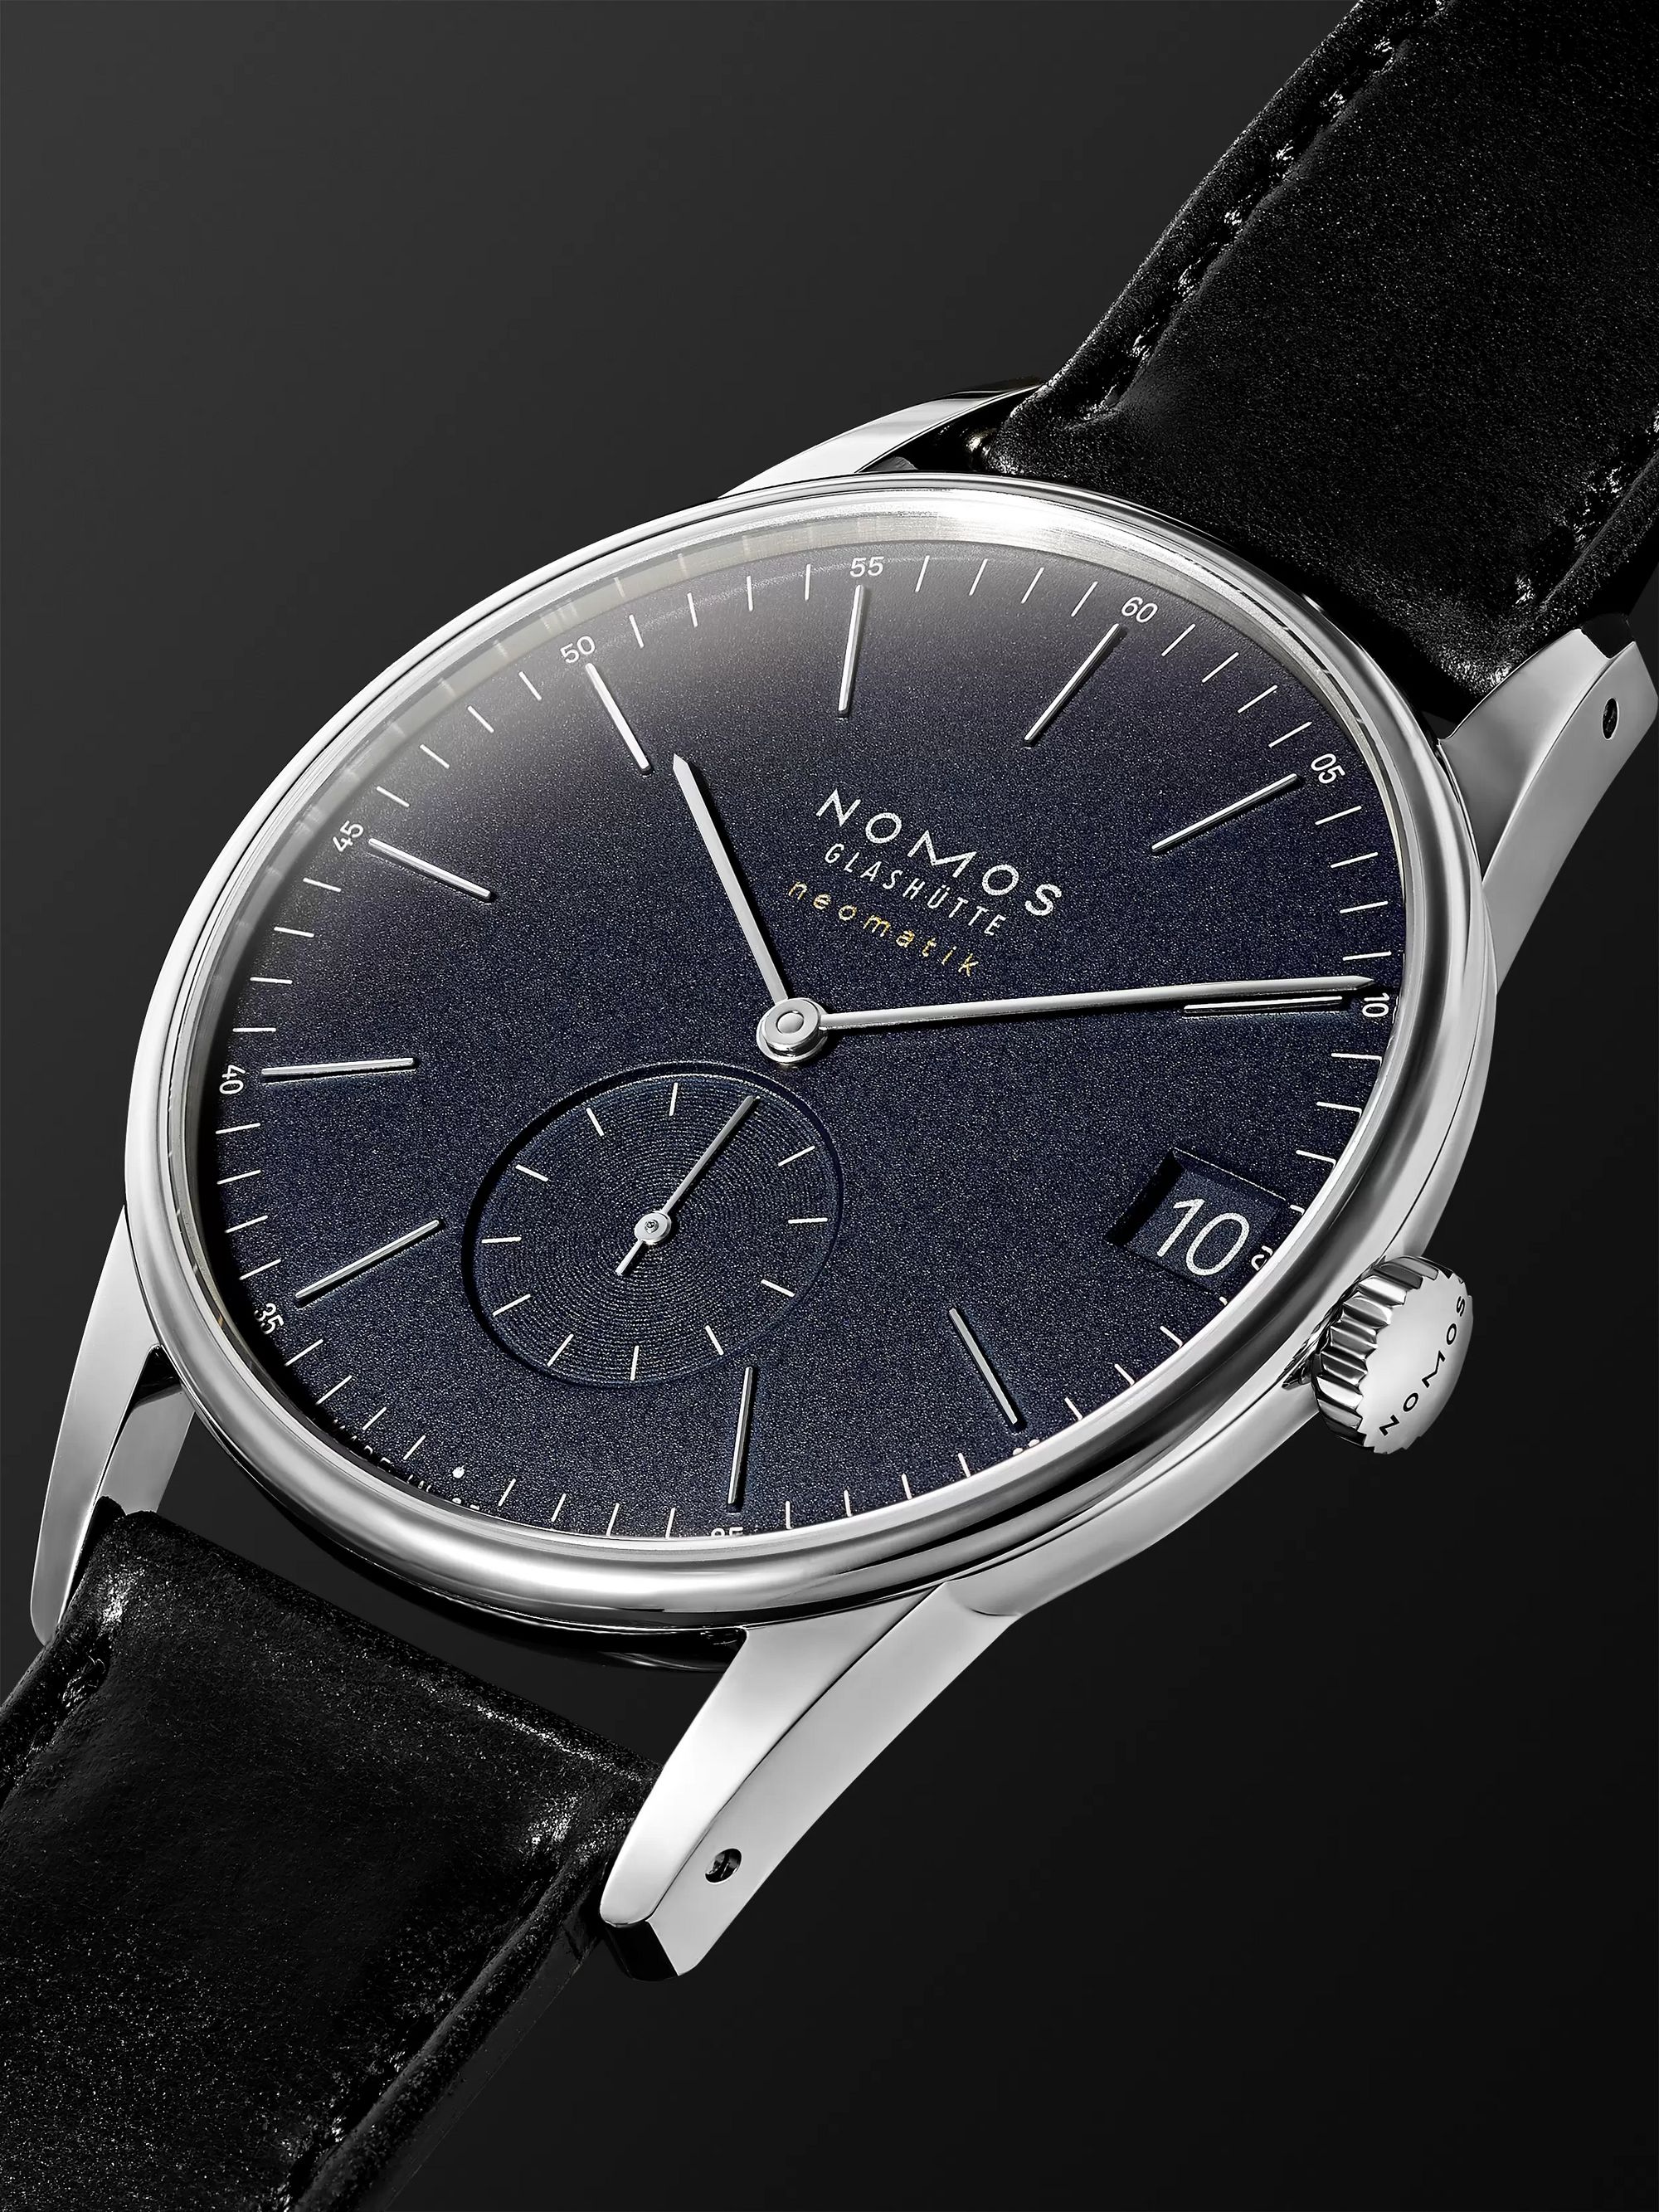 NOMOS GLASHÜTTE Orion Neomatik Datum Automatic 41mm Stainless Steel and Cordovan Leather Watch, Ref. No. 363